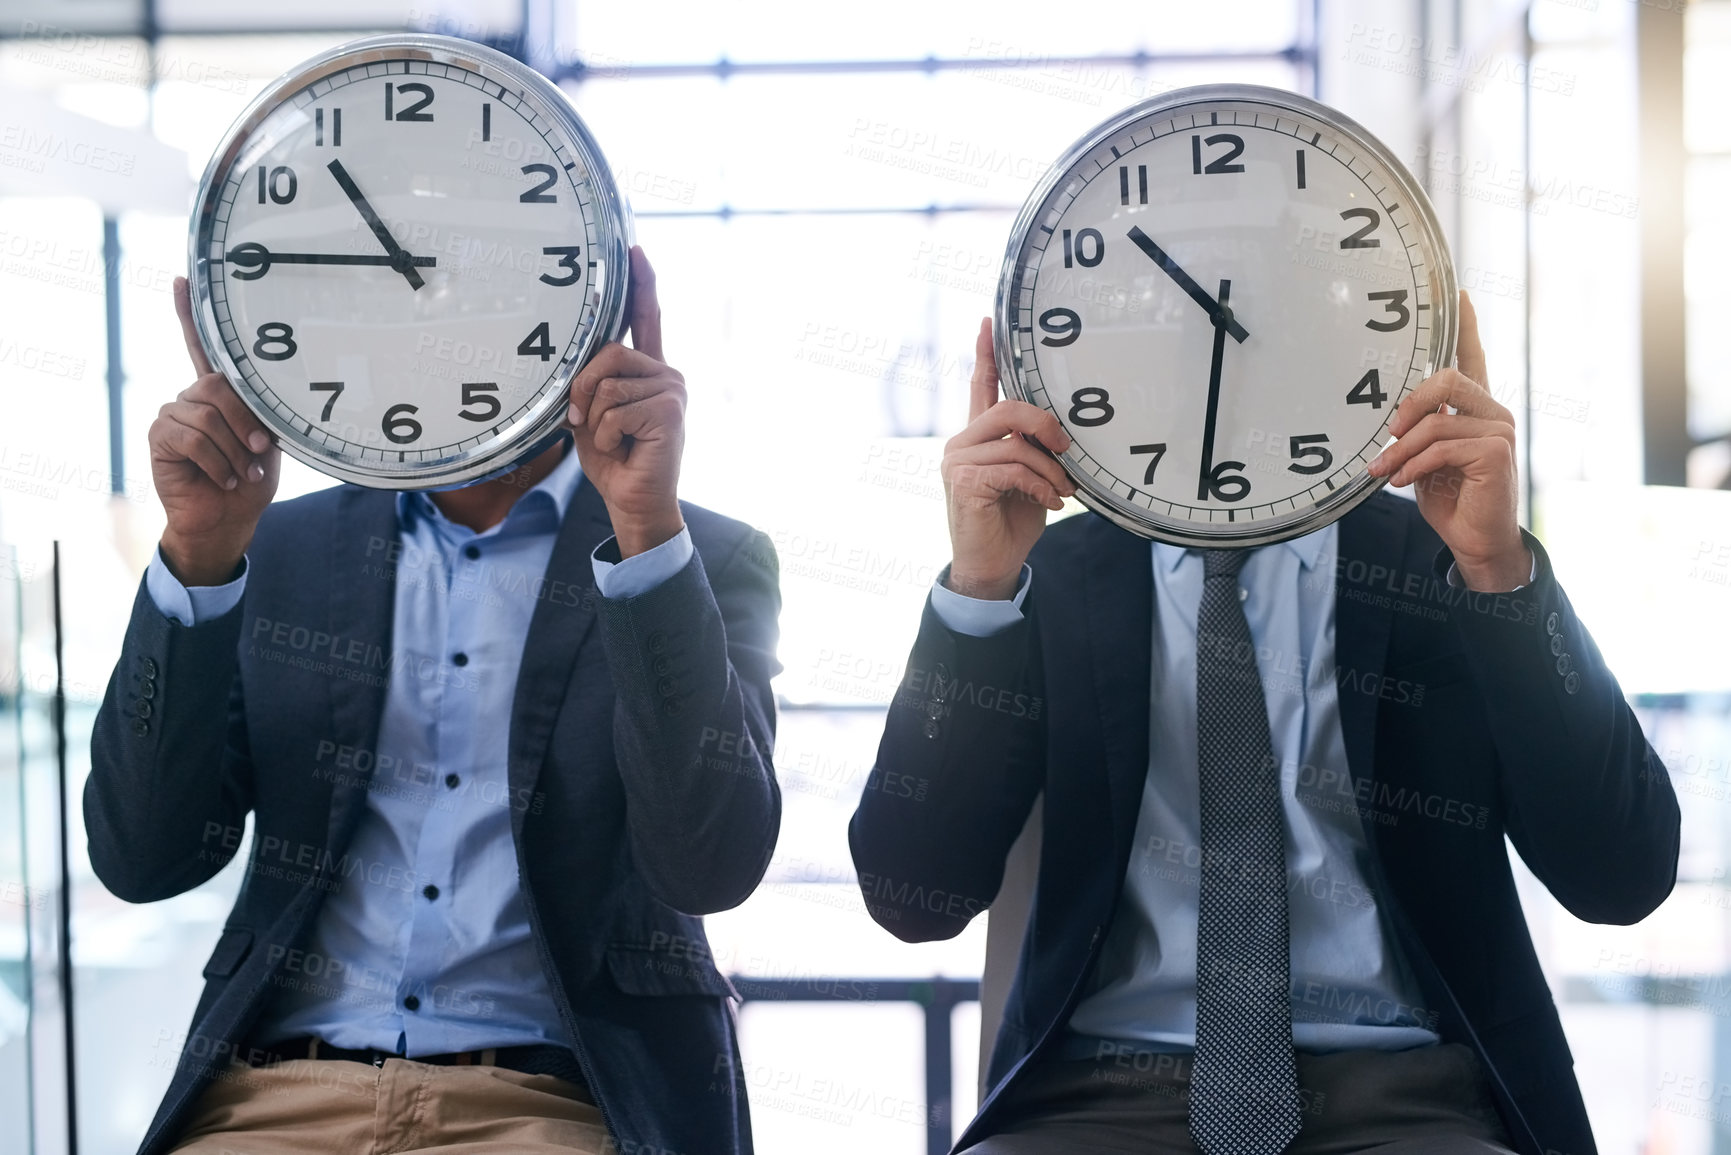 Buy stock photo Cropped shot of two businessmen holding clocks over their faces in the office